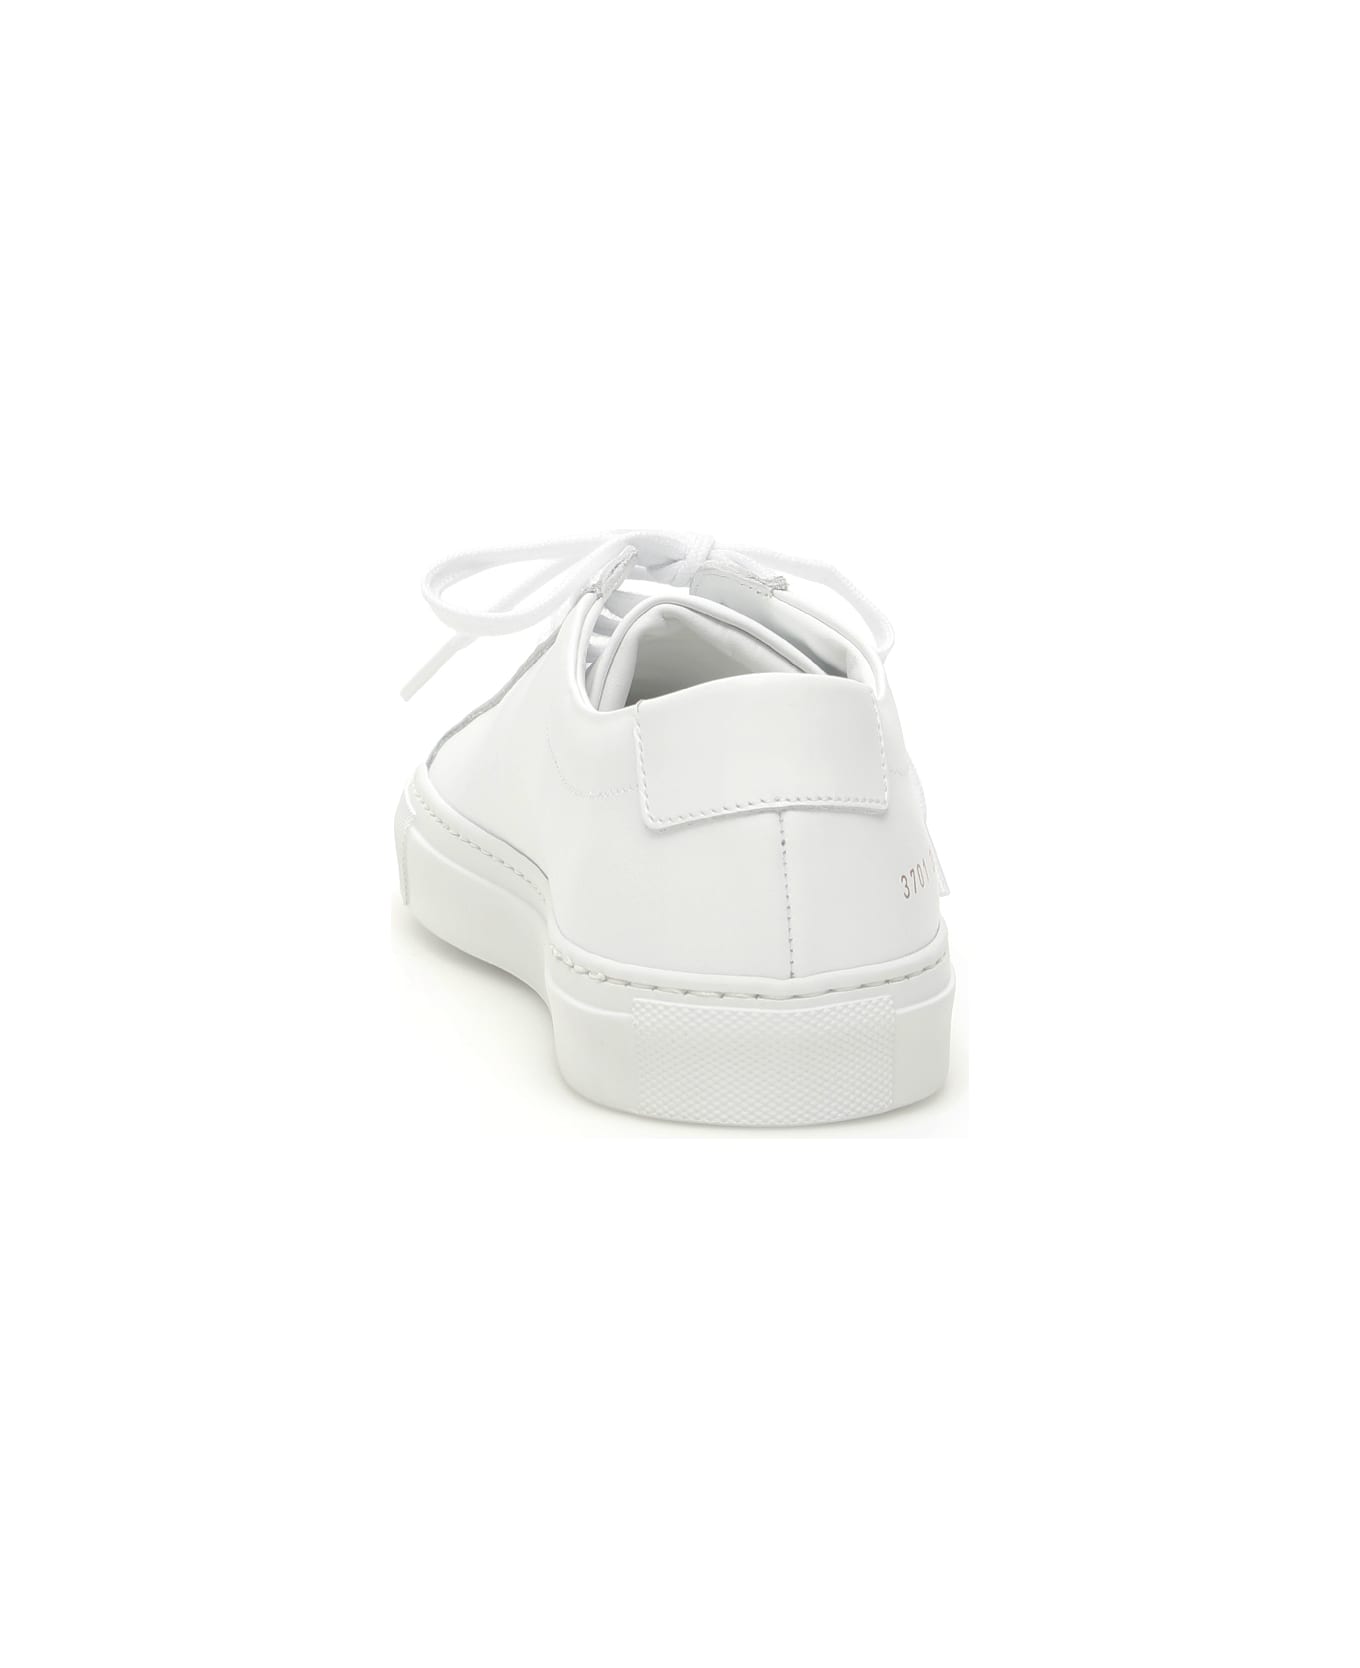 Common Projects Original Achilles Leather Sneakers - Bianco